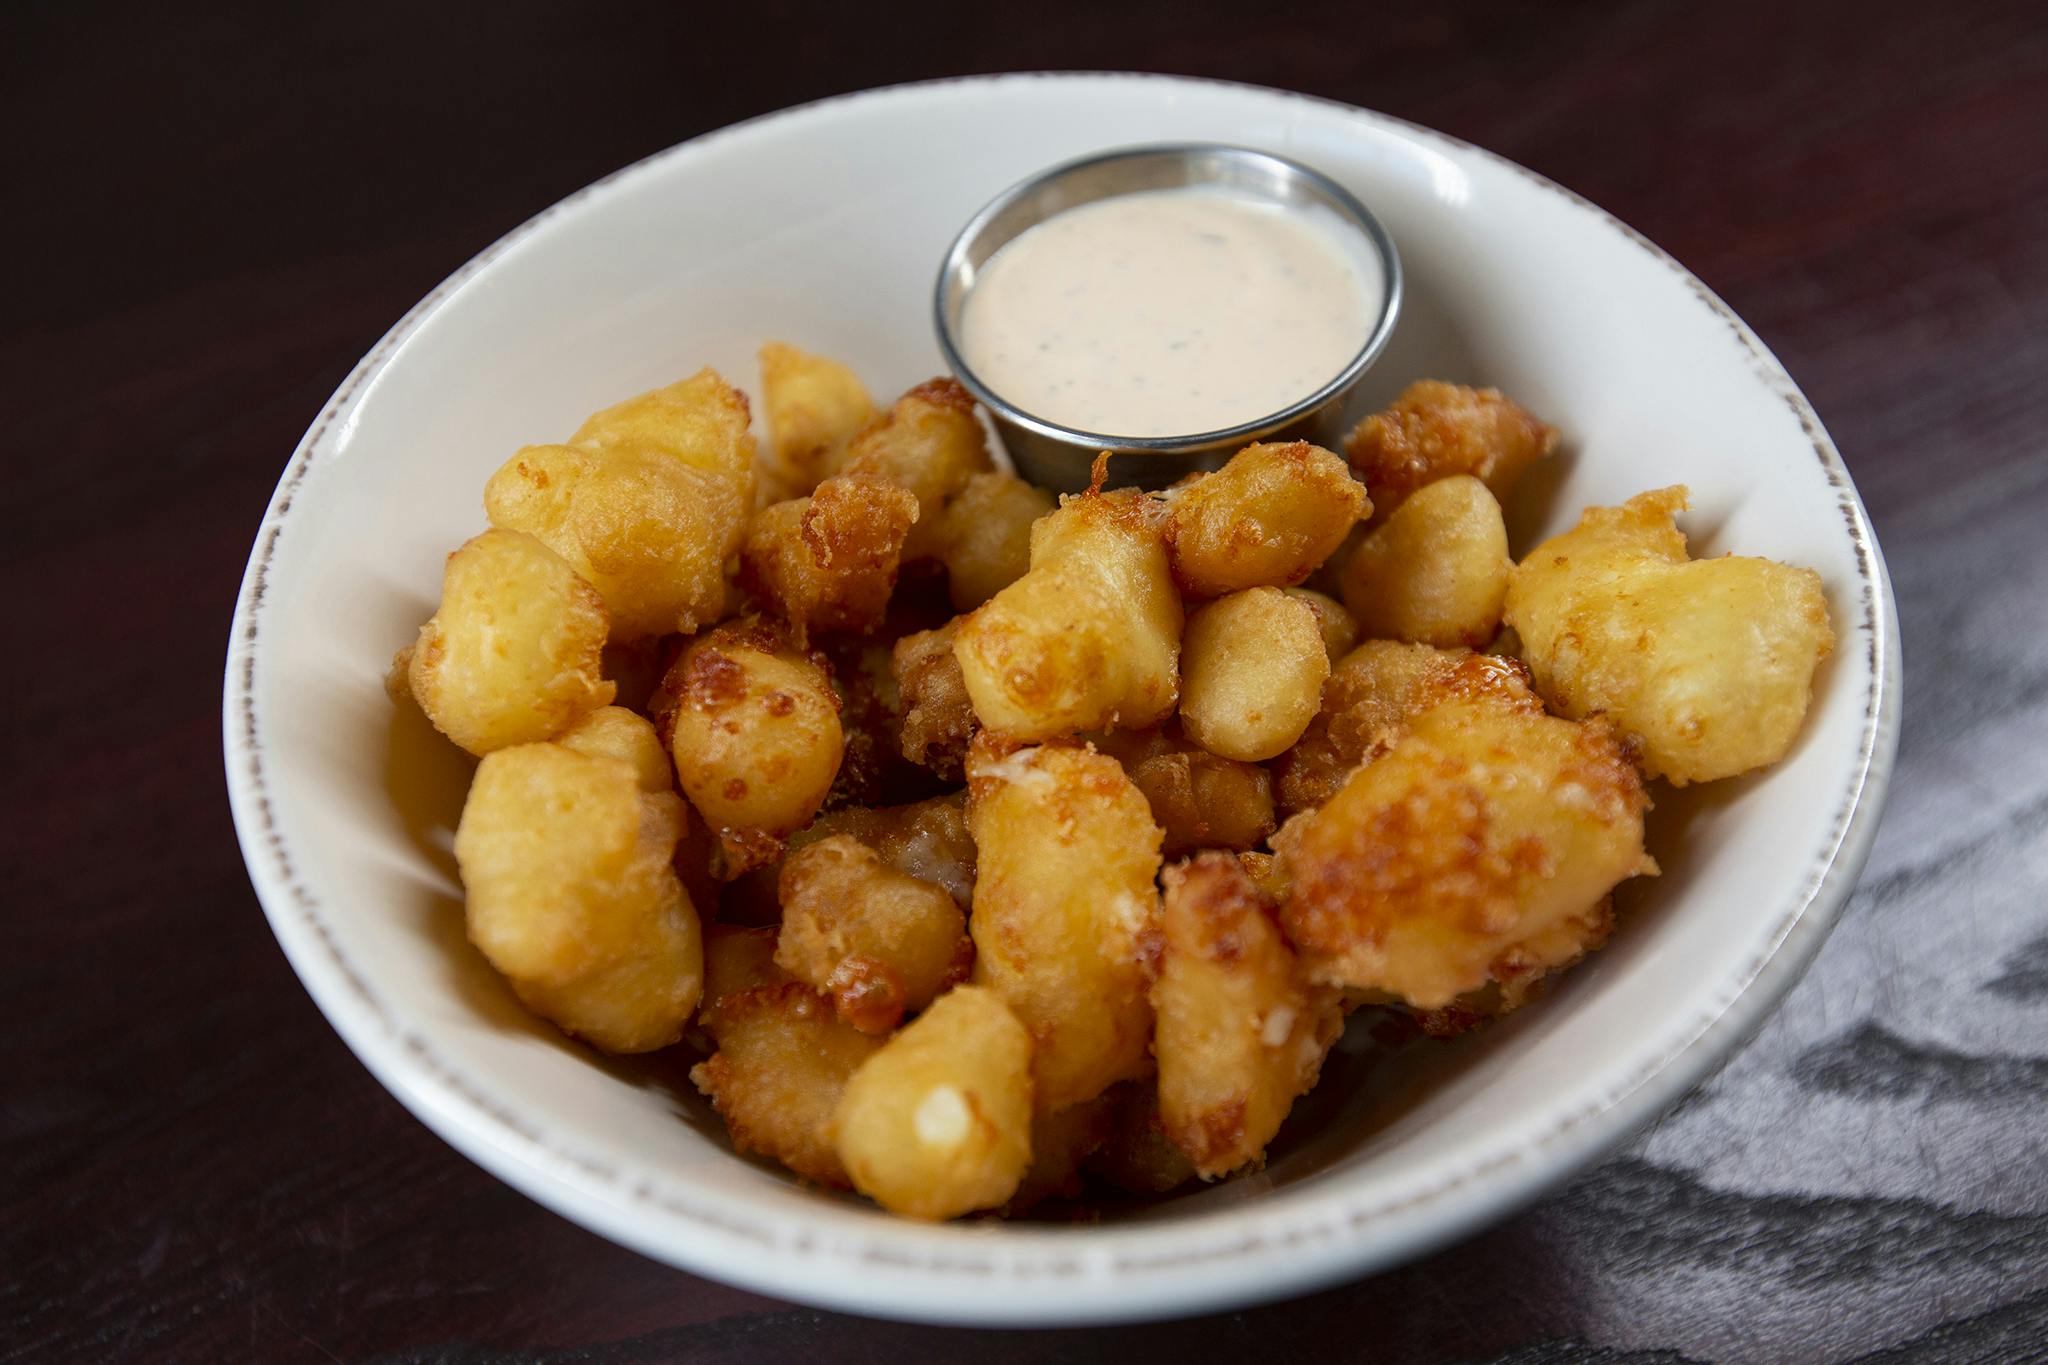 Cheese Curds from Firehouse Grill - Chicago Ave in Evanston, IL